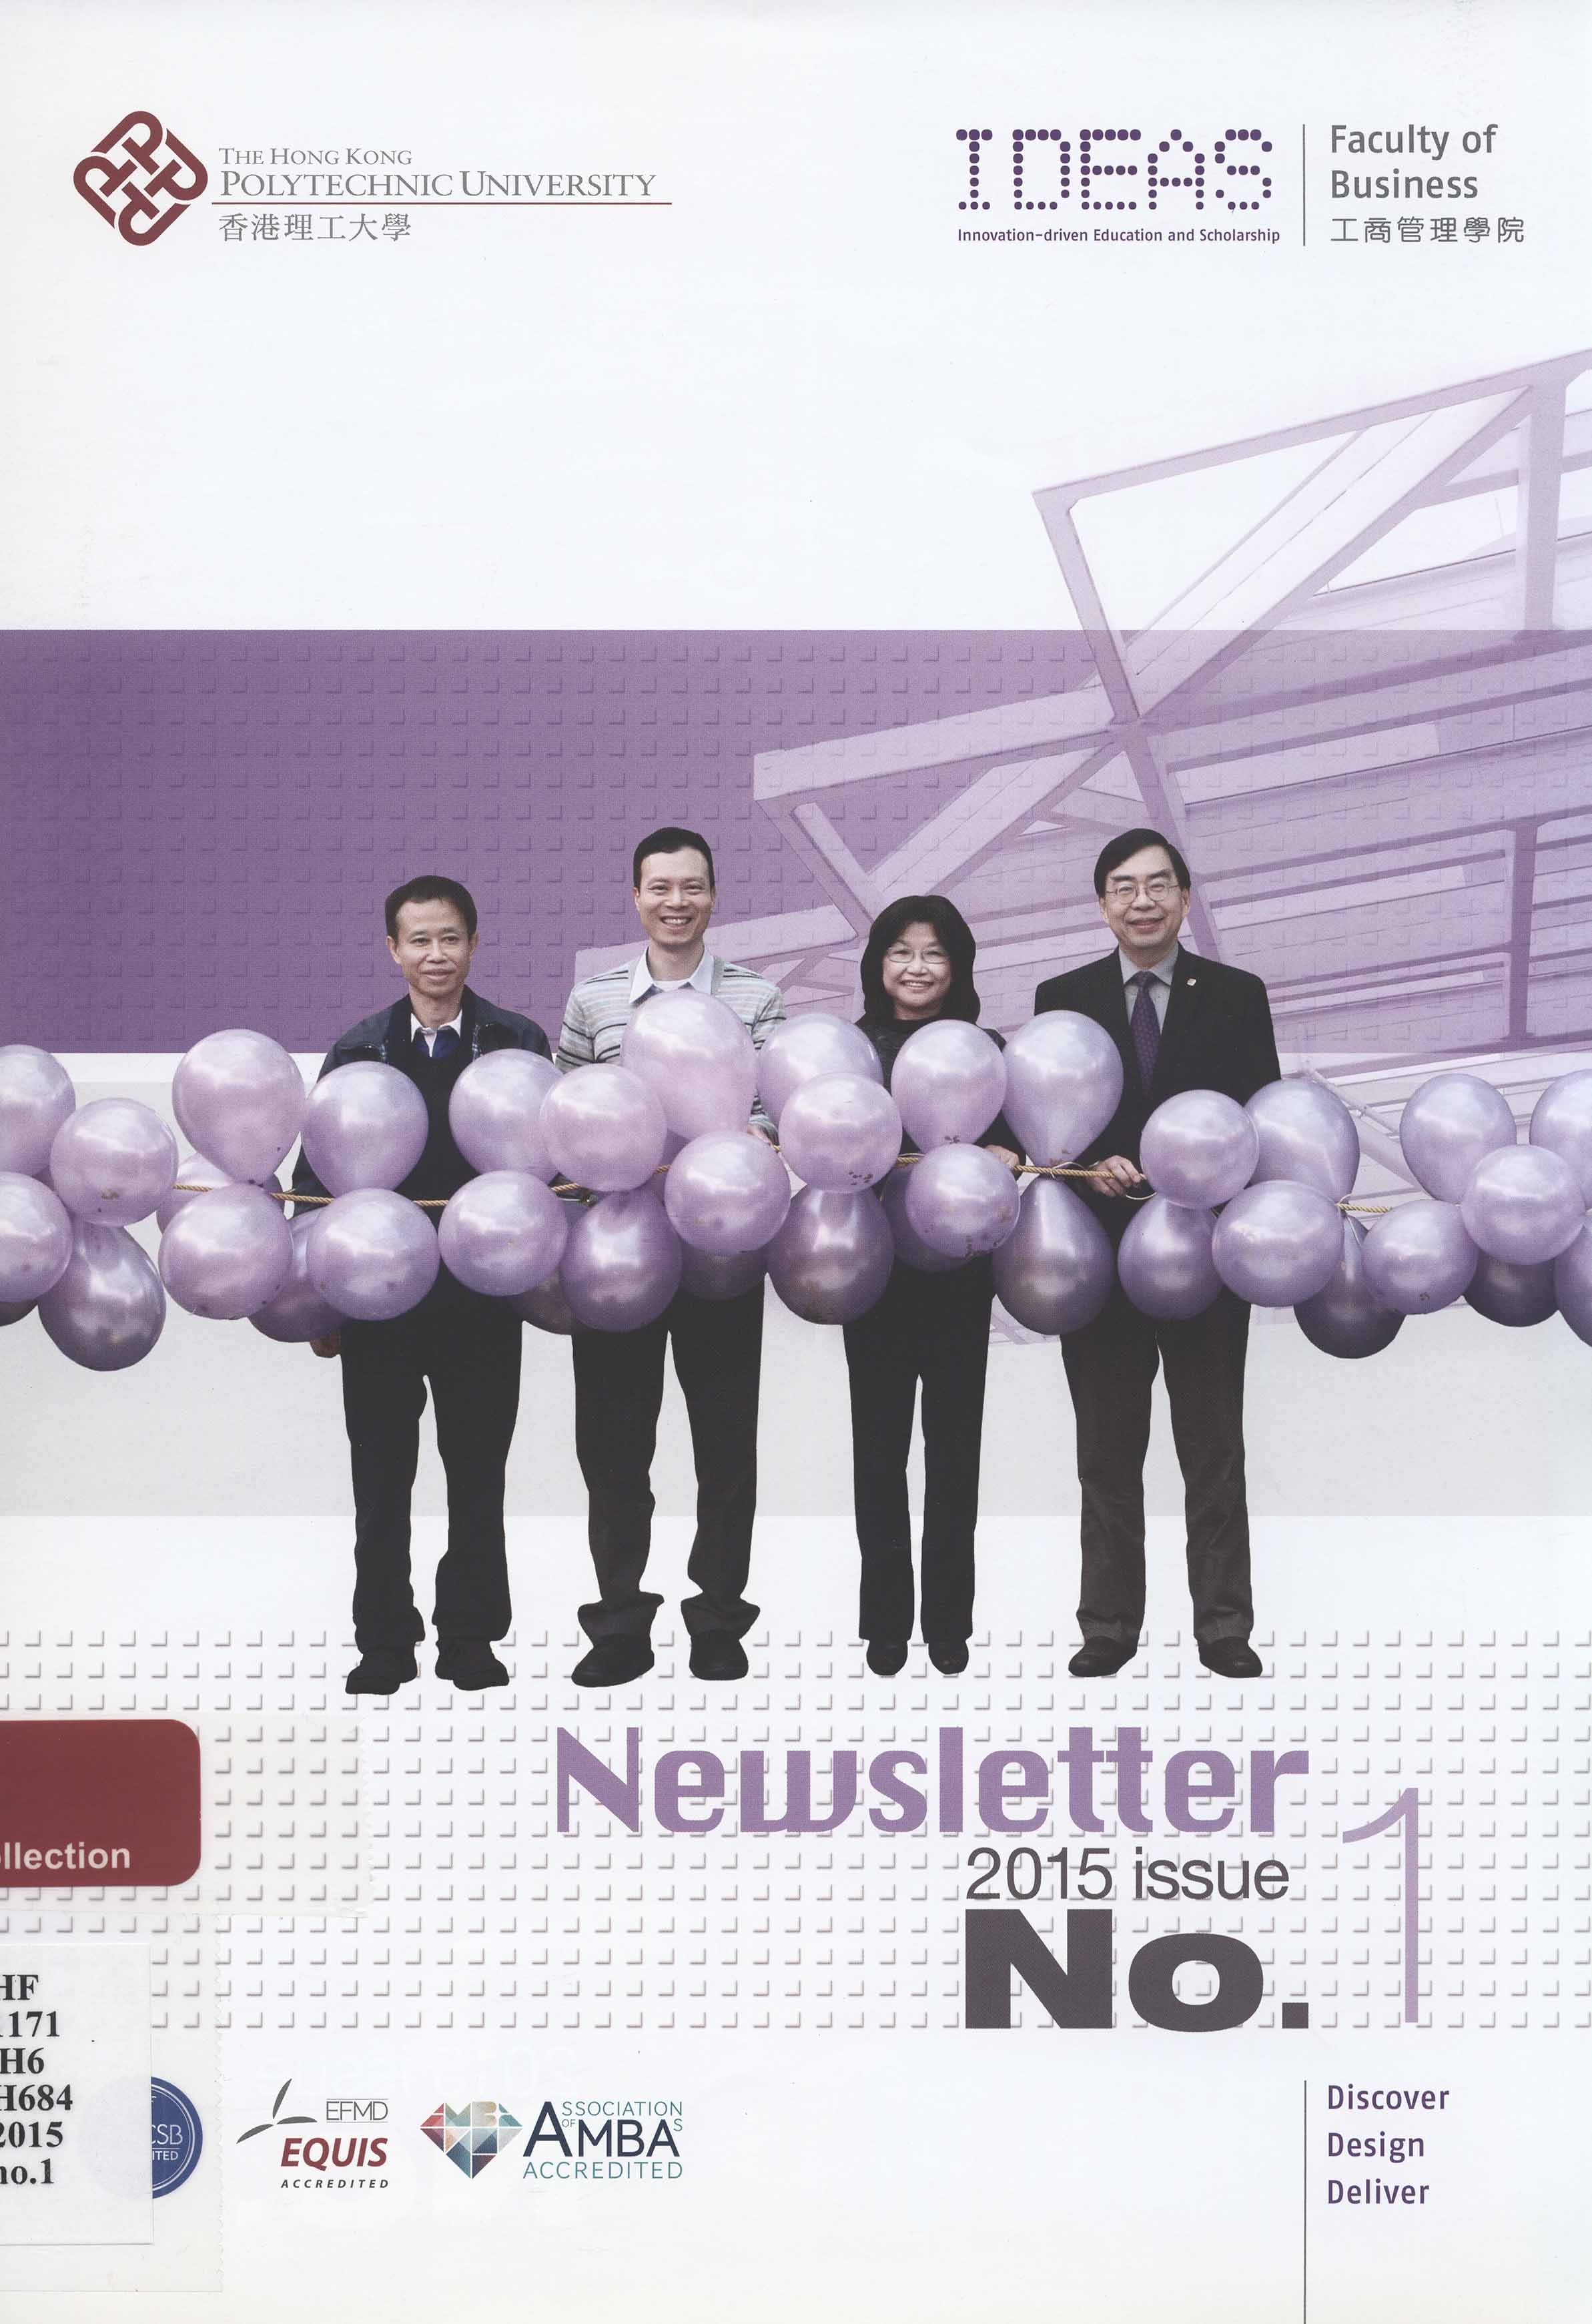 Faculty of Business newsletter. No.1, 2015